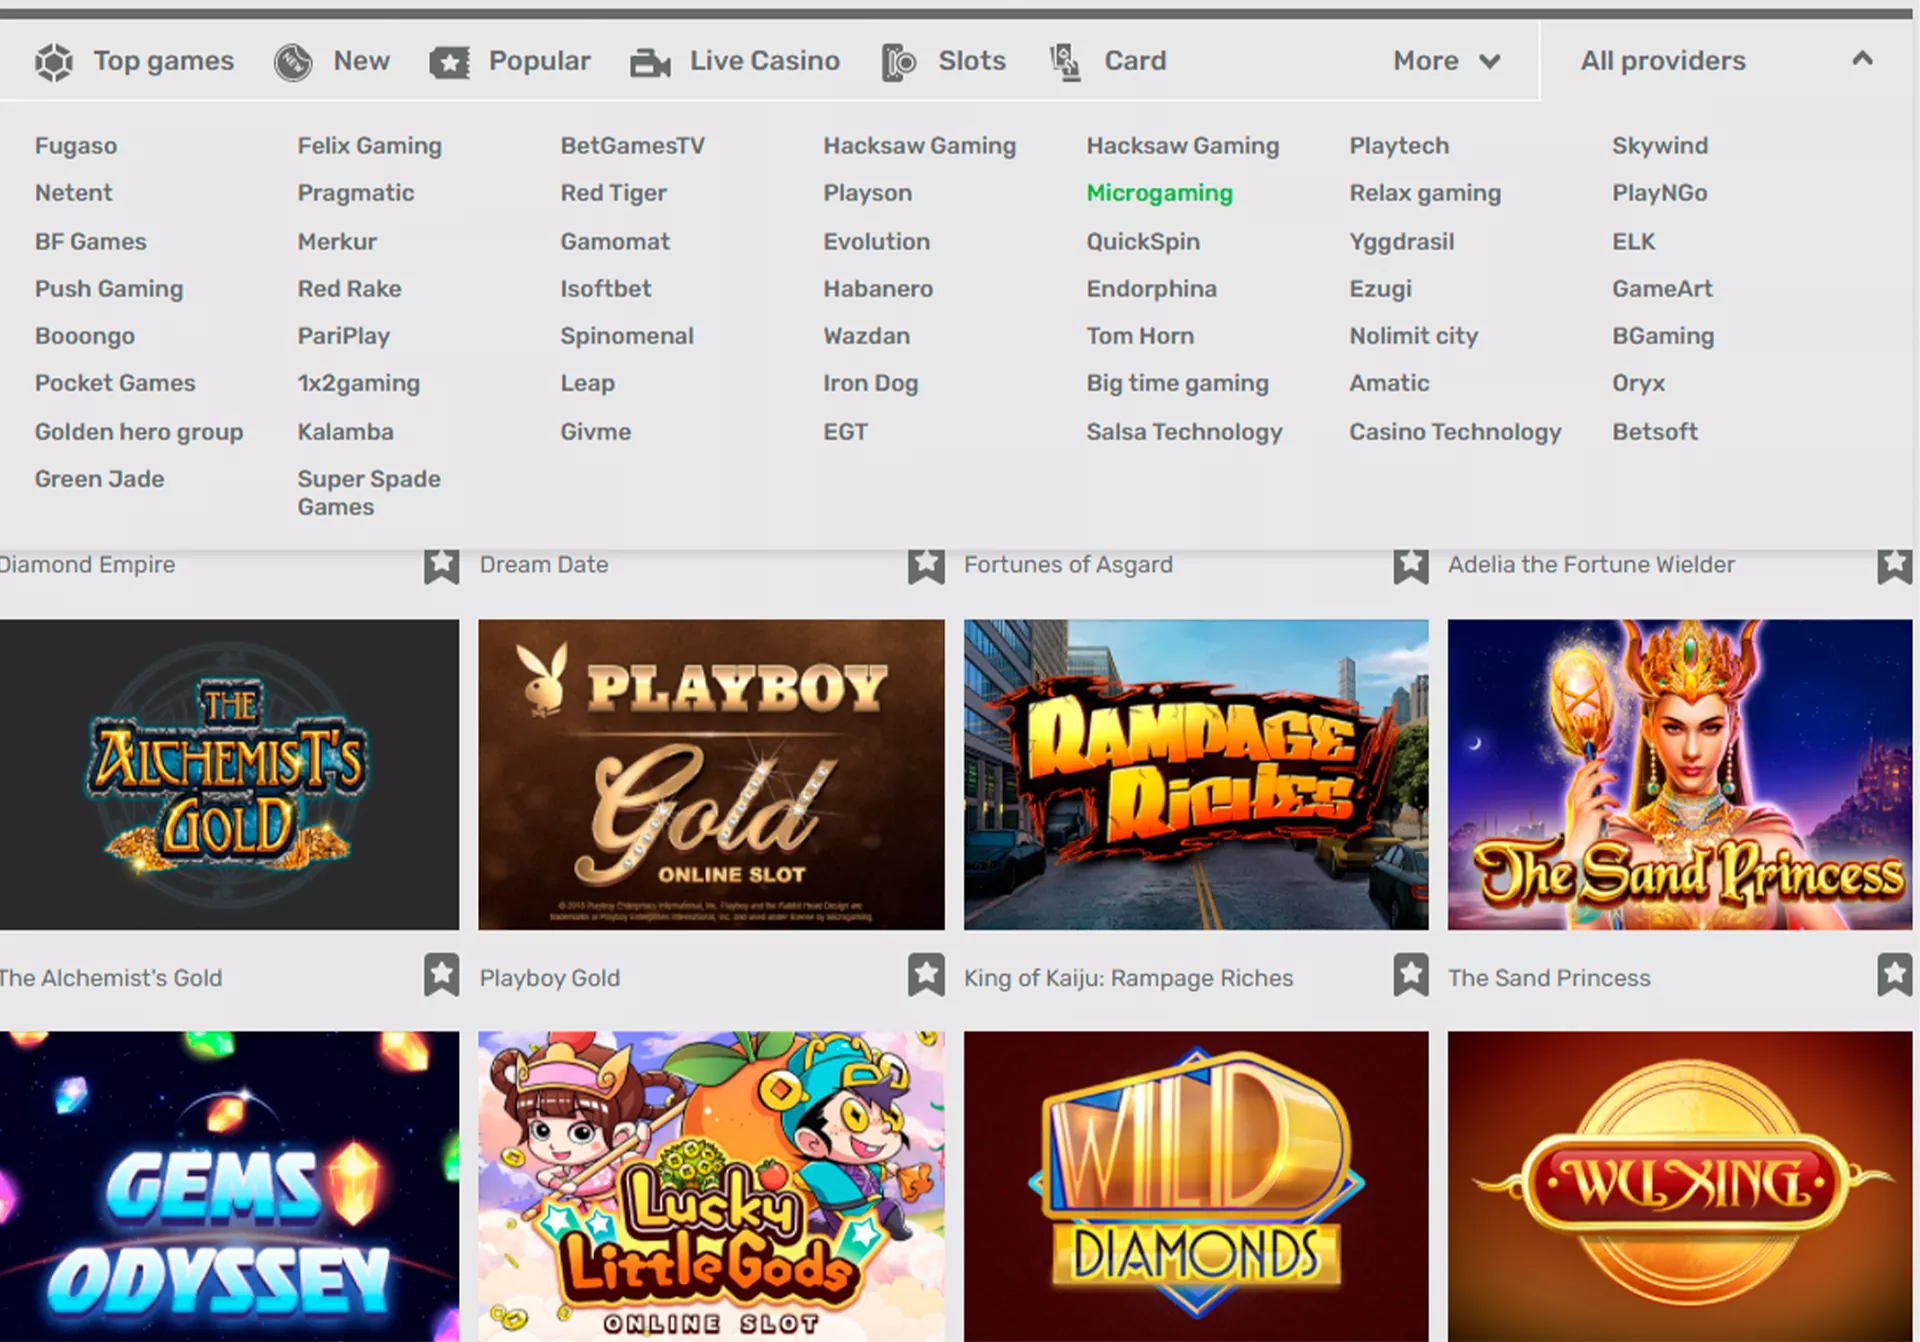 There are a lot of casino games and betting offers at Campobet.